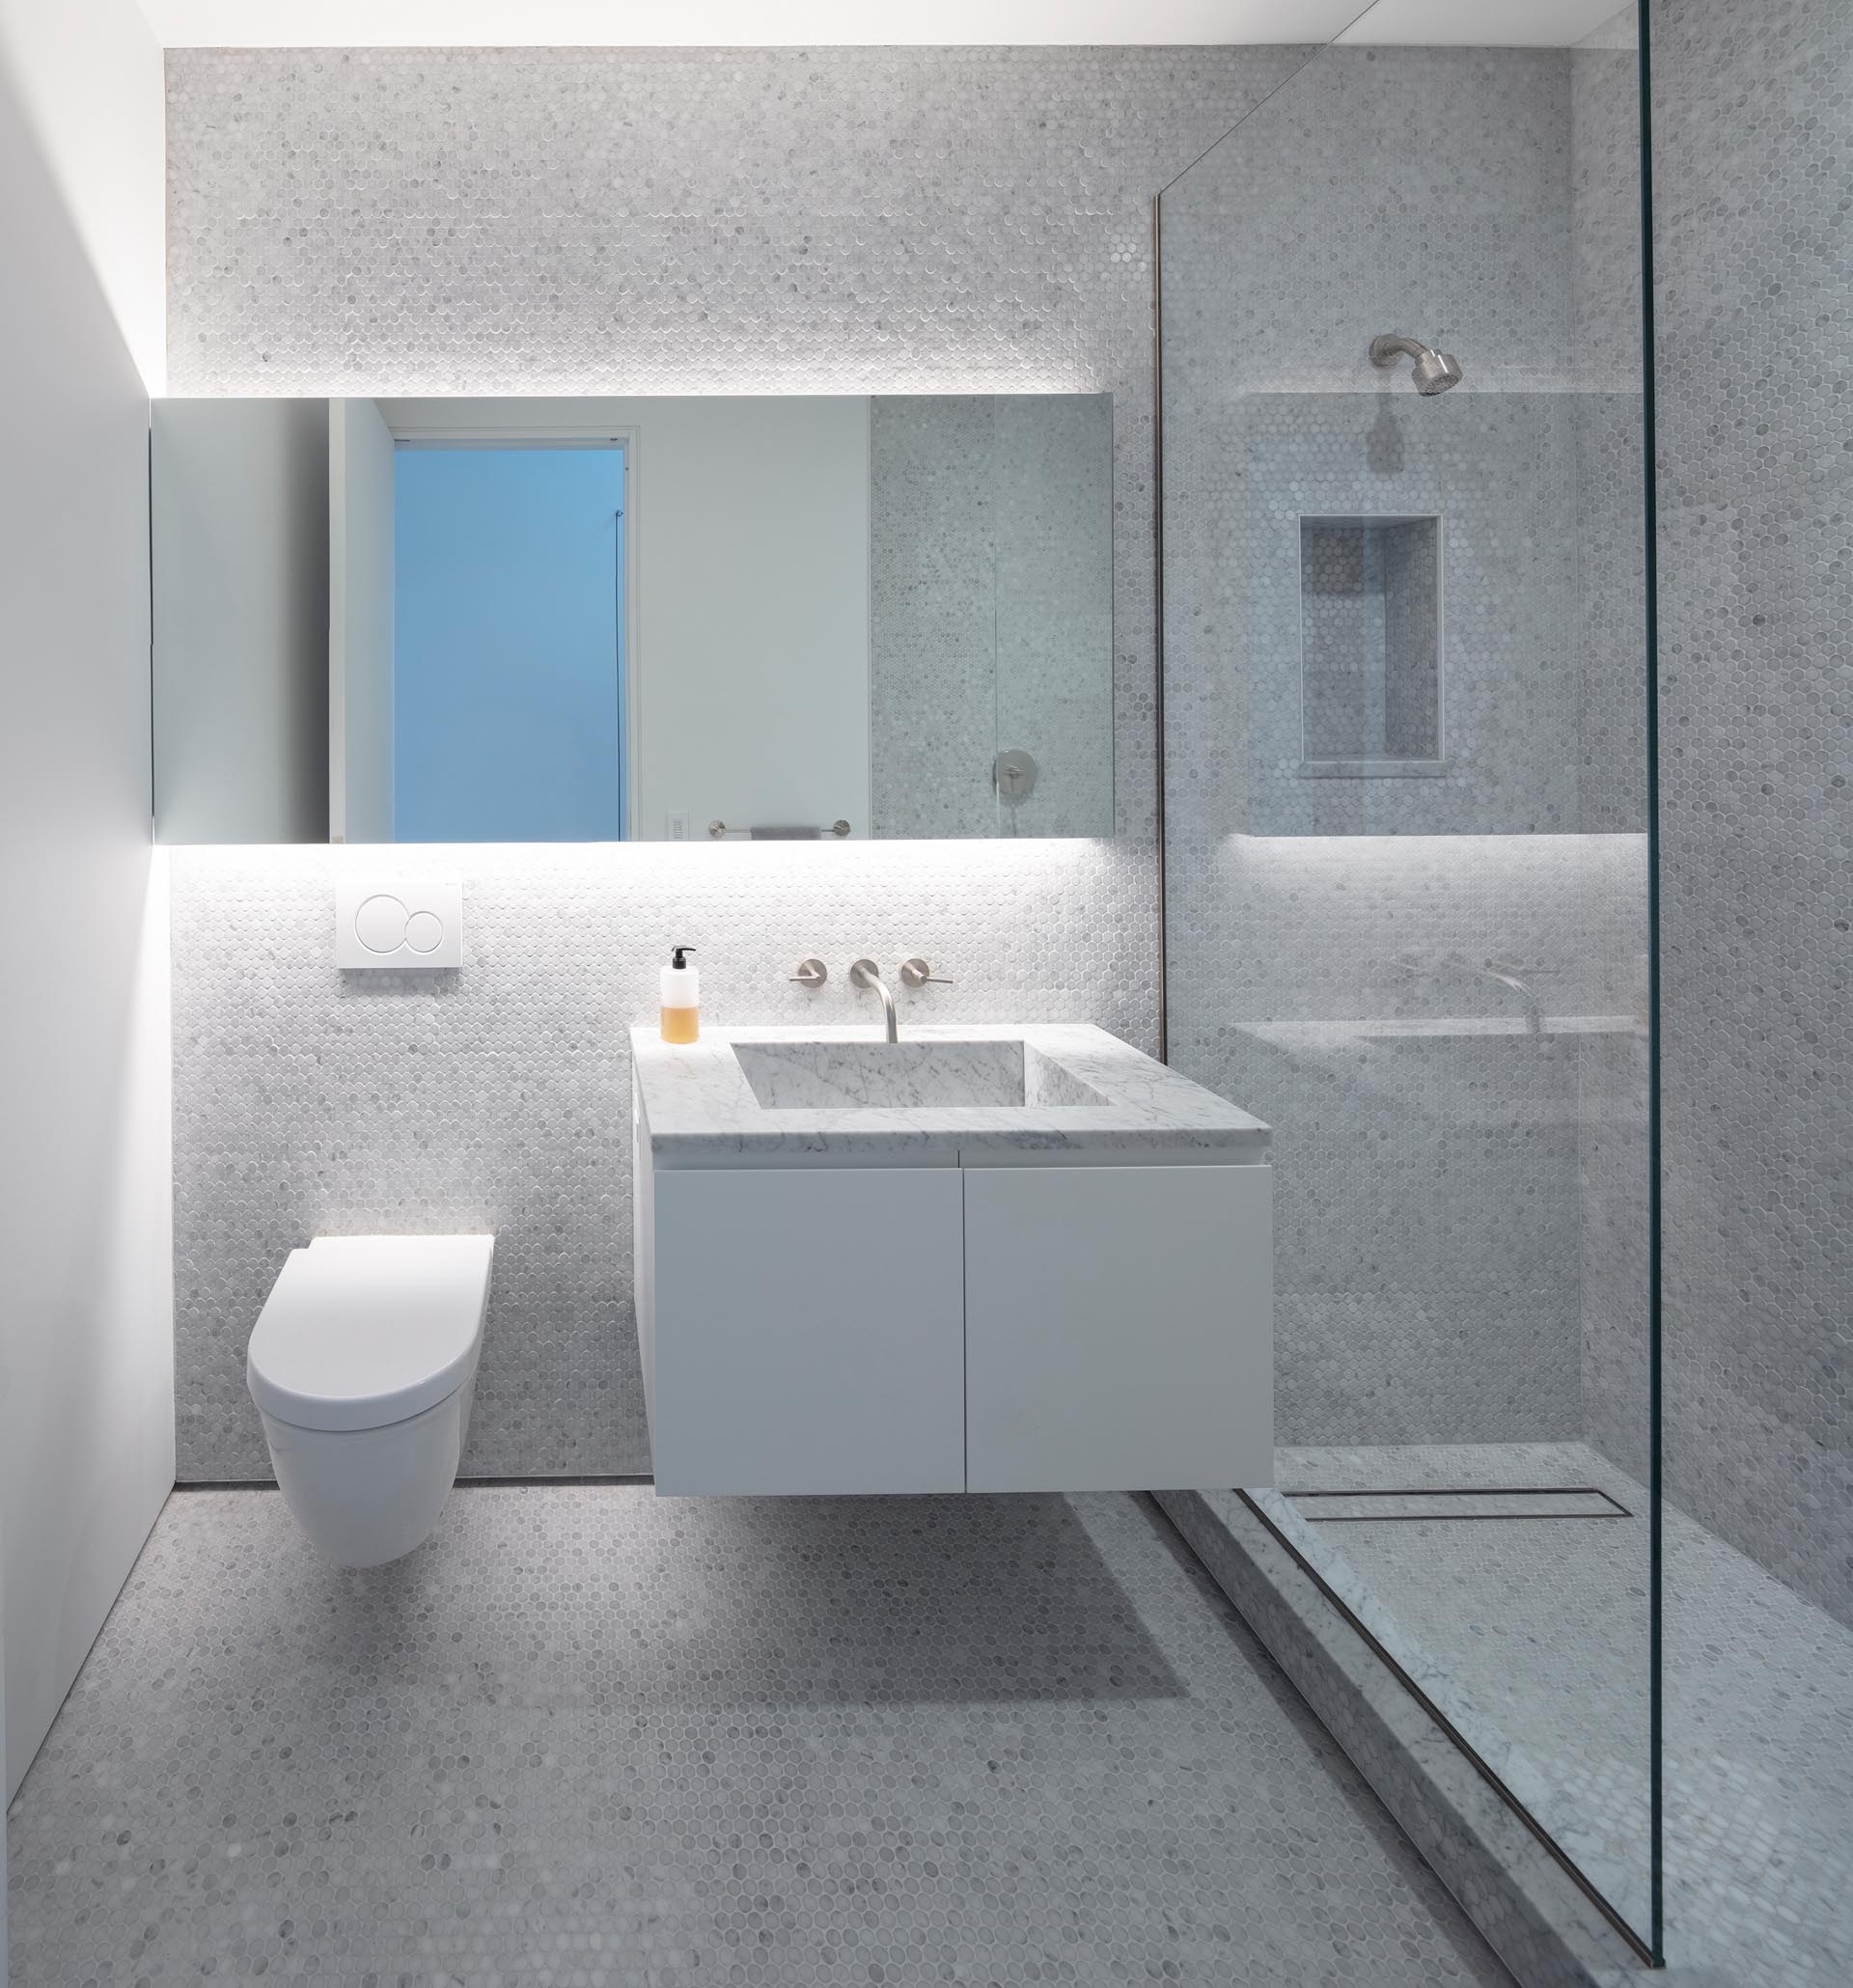 A modern bathroom with floor-to-ceiling grey penny tiles, a glass shower screen, a backlit mirror, and a floating vanity.